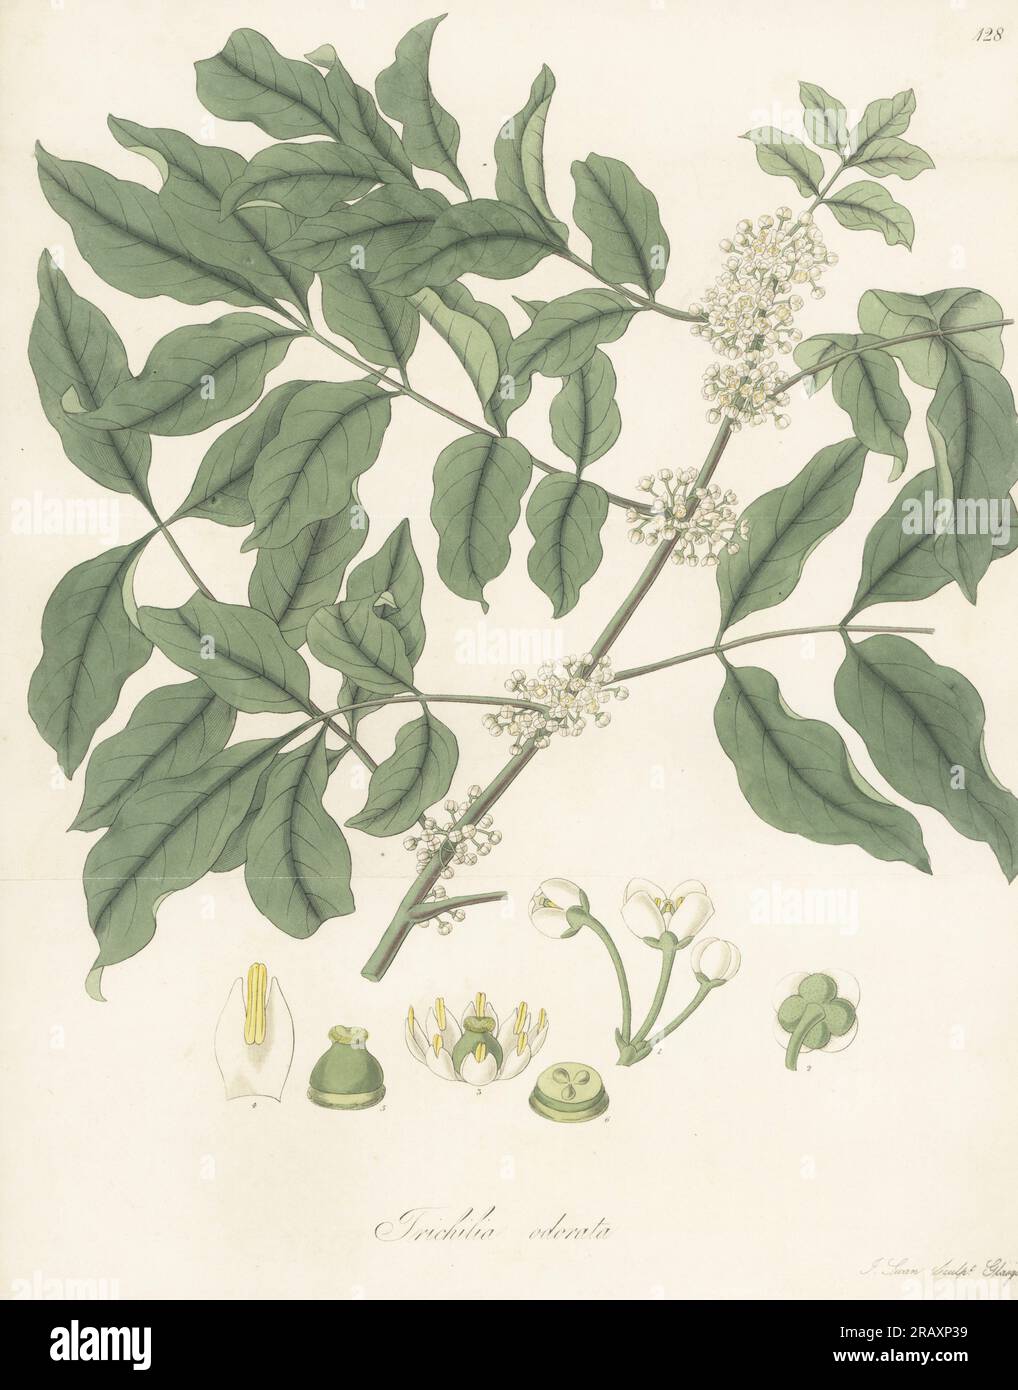 Palo de cuchara or limoncillo, Trichilia havanensis. Caribbean softwood plant sent to England from St Vincent by Scottish botanist Dr. Alexander Anderson. Sweet-scented trichilia, Trichilia odorata. Handcoloured copperplate engraving by Joseph Swan after a botanical illustration by William Jackson Hooker from his Exotic Flora, William Blackwood, Edinburgh, 1823-27. Stock Photo